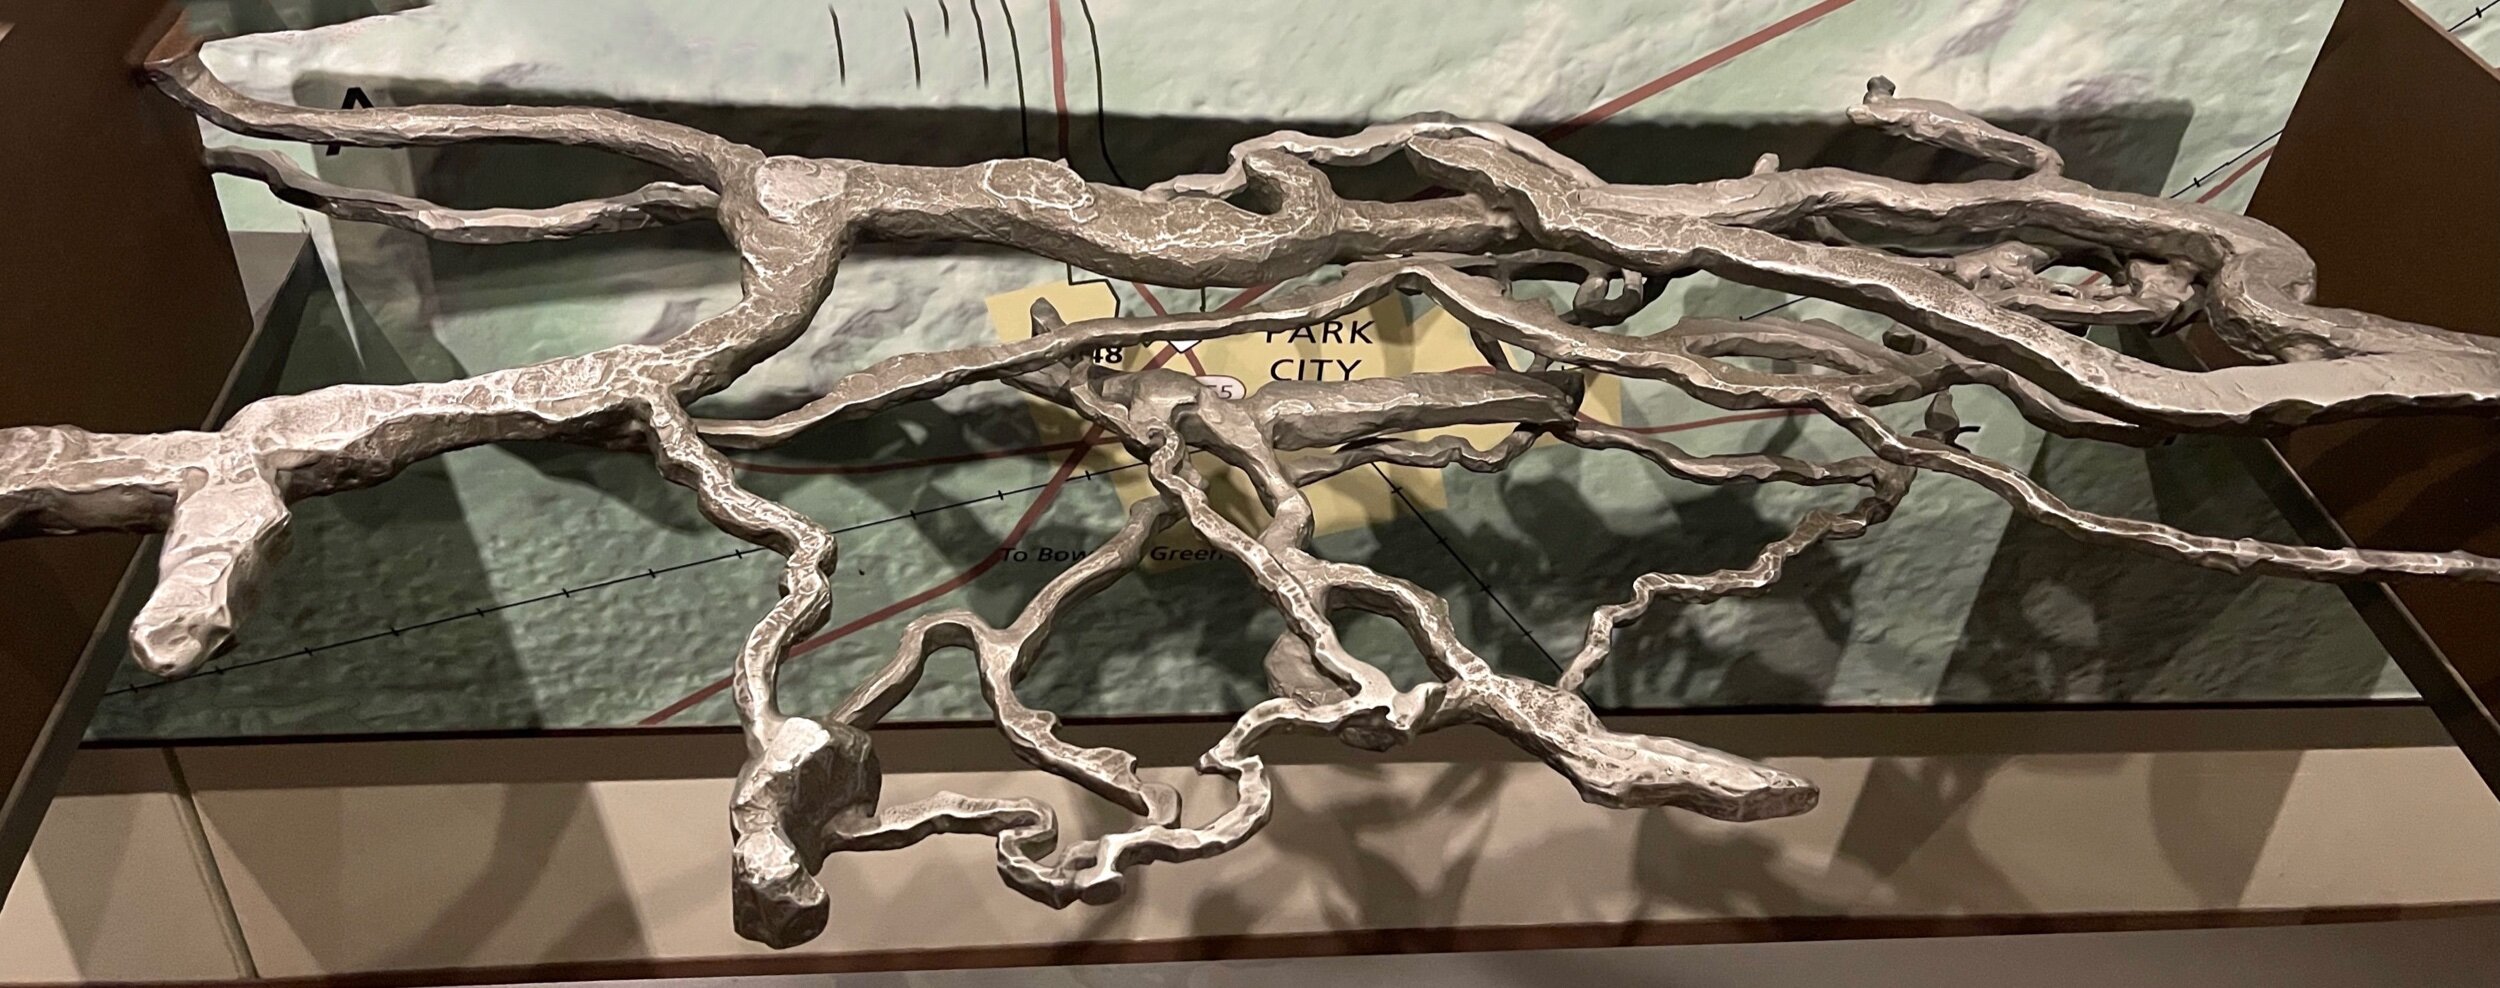  This is a model of the Mammoth cave system and many of the tributaries that are currently known. Some cave areas are quite large, while other areas can only be entered by crawling or squeezing through narrow openings in the rocks. The form of the ca